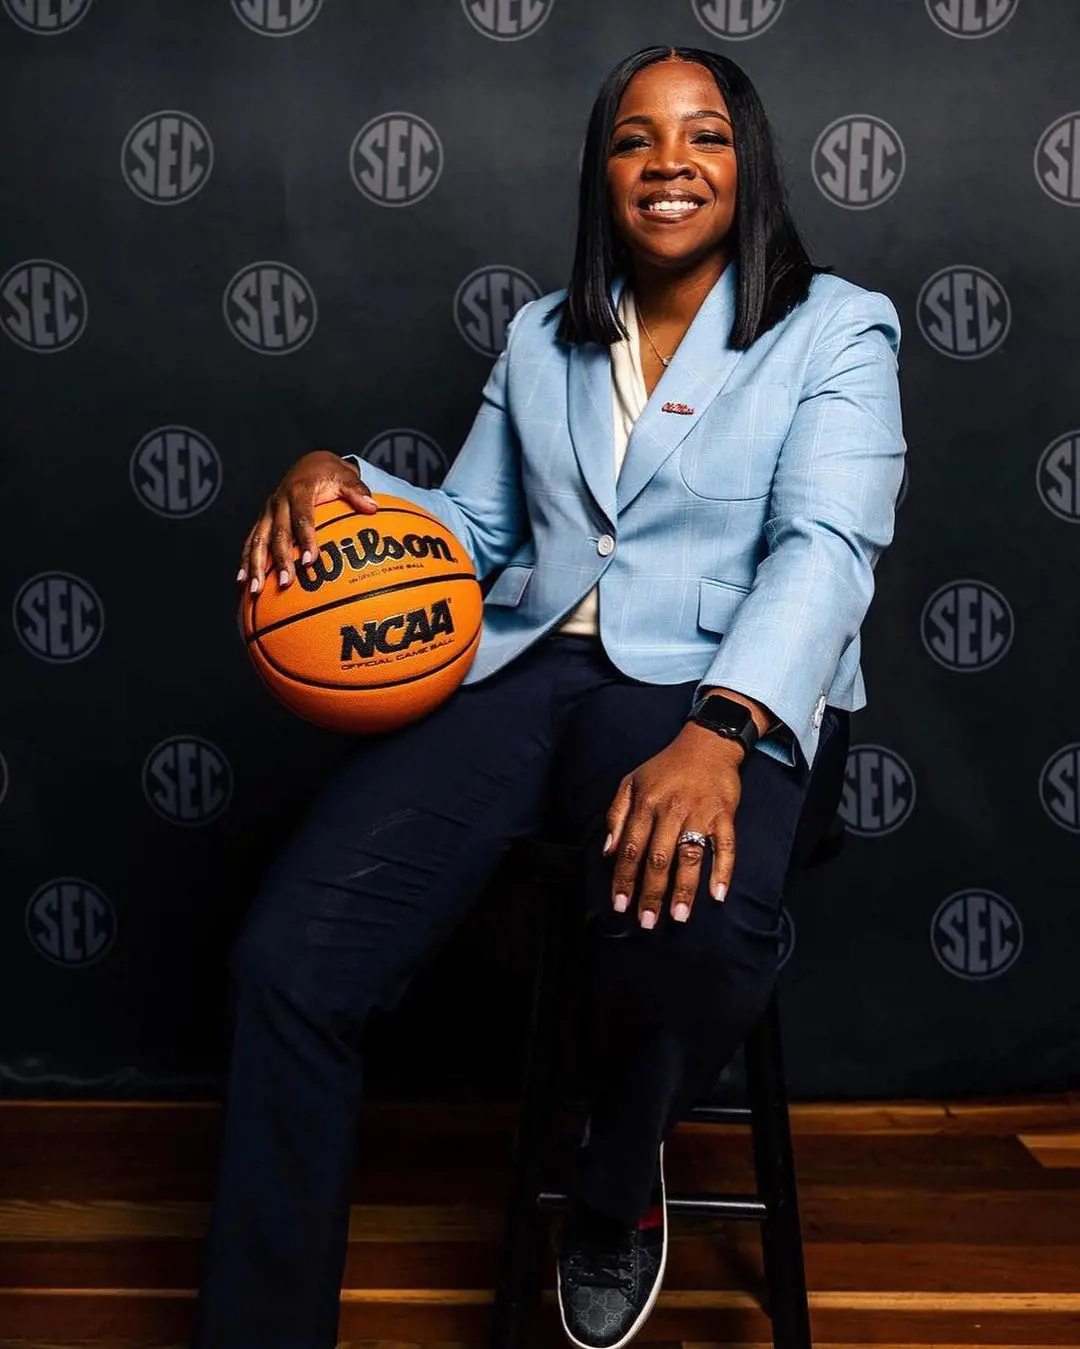 Head coach Yolett has signed a four year contract for extending her tenure with the Ole Miss Rebels till 2026.